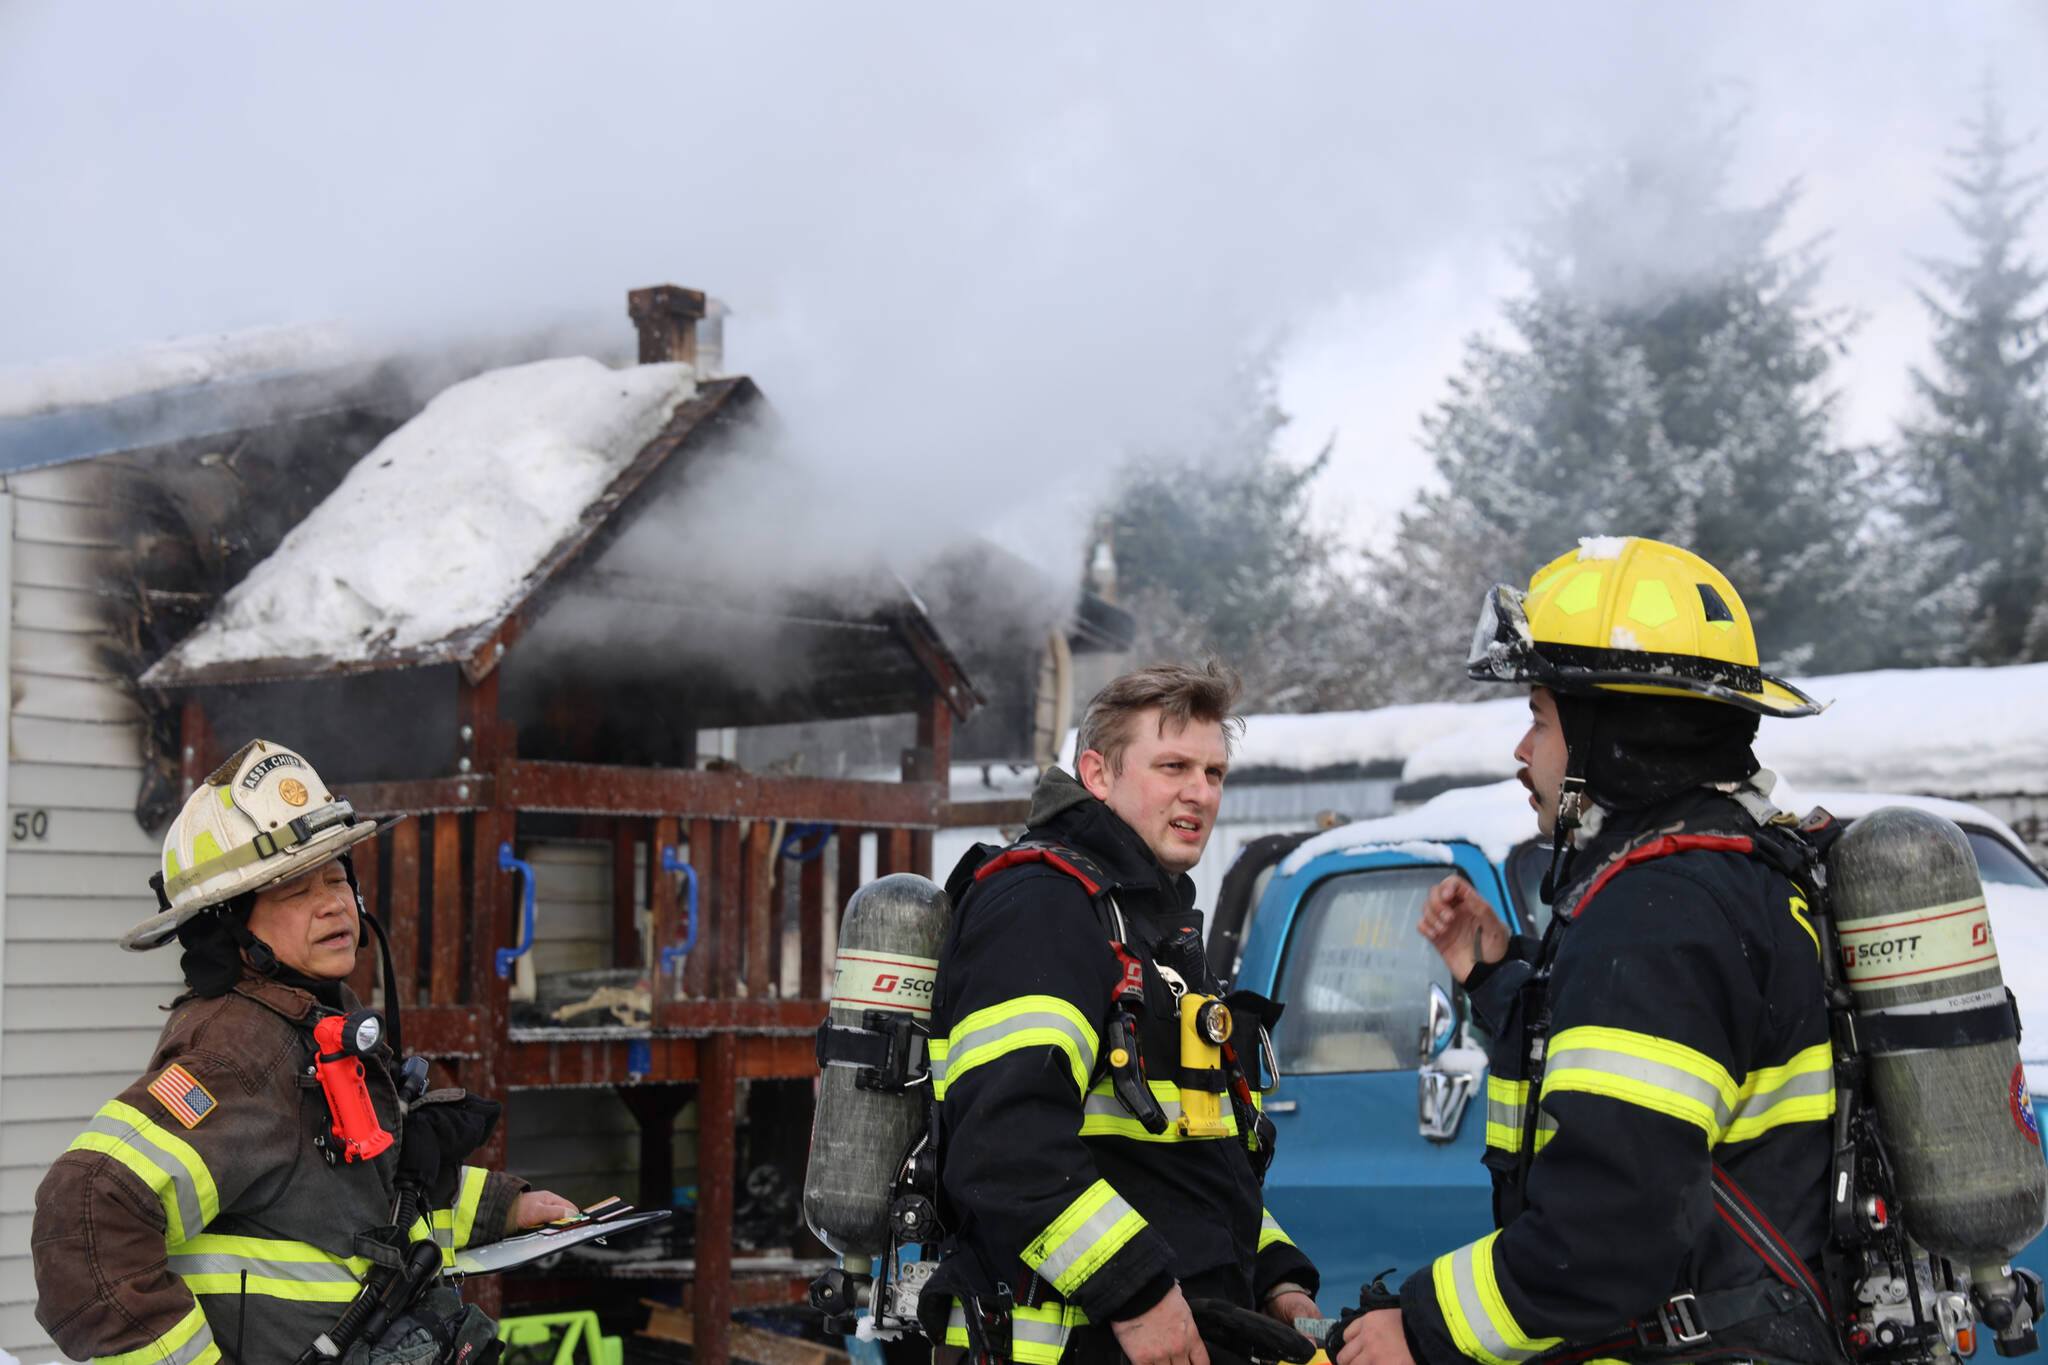 Capital City Fire/Rescue firefighters move to extinguish a trailer fire Friday morning. The cause of the fire is believed to be caused by an electric toaster, officials say. (Clarise Larson / Juneau Empire)